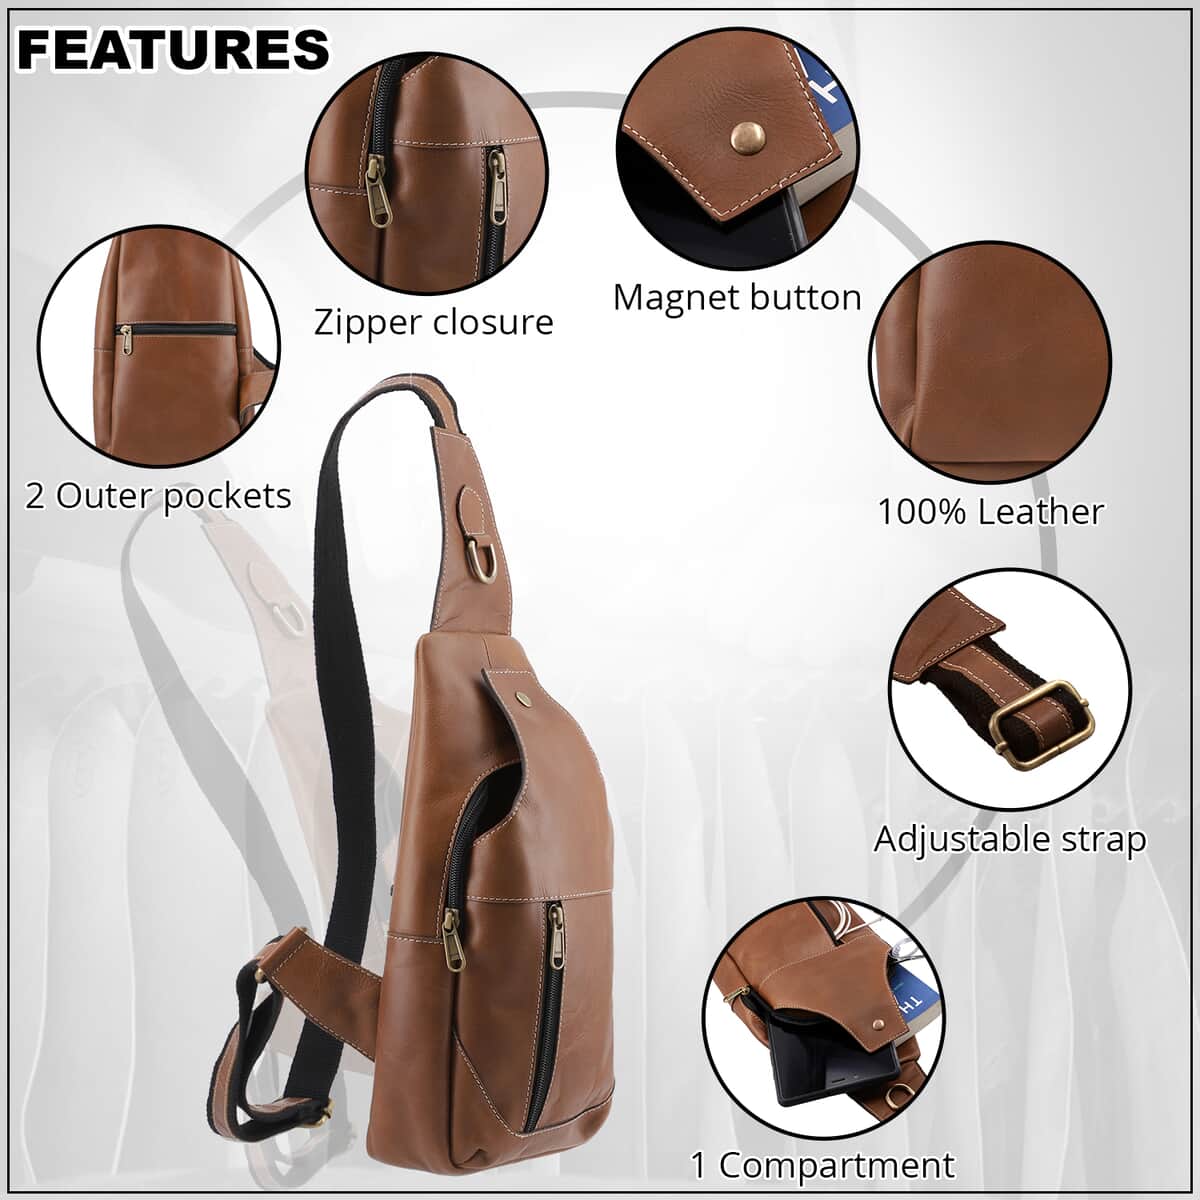 "100% Genuine Leather anti theft backpack bag Color: Beige Size: 5.9L x 3.2W x 8.66H inches " image number 2